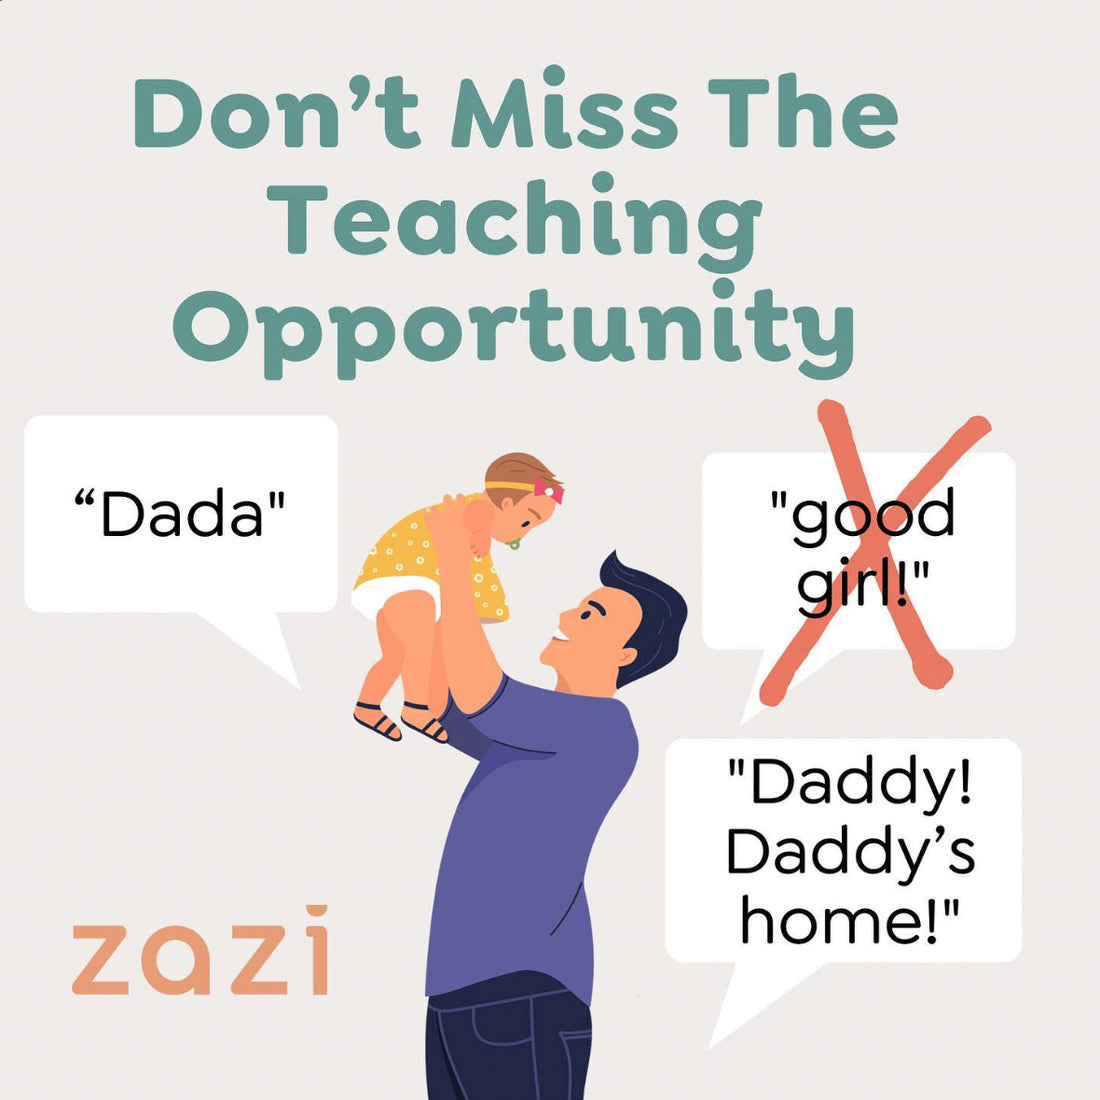 Don't Miss the Teaching Opportunity